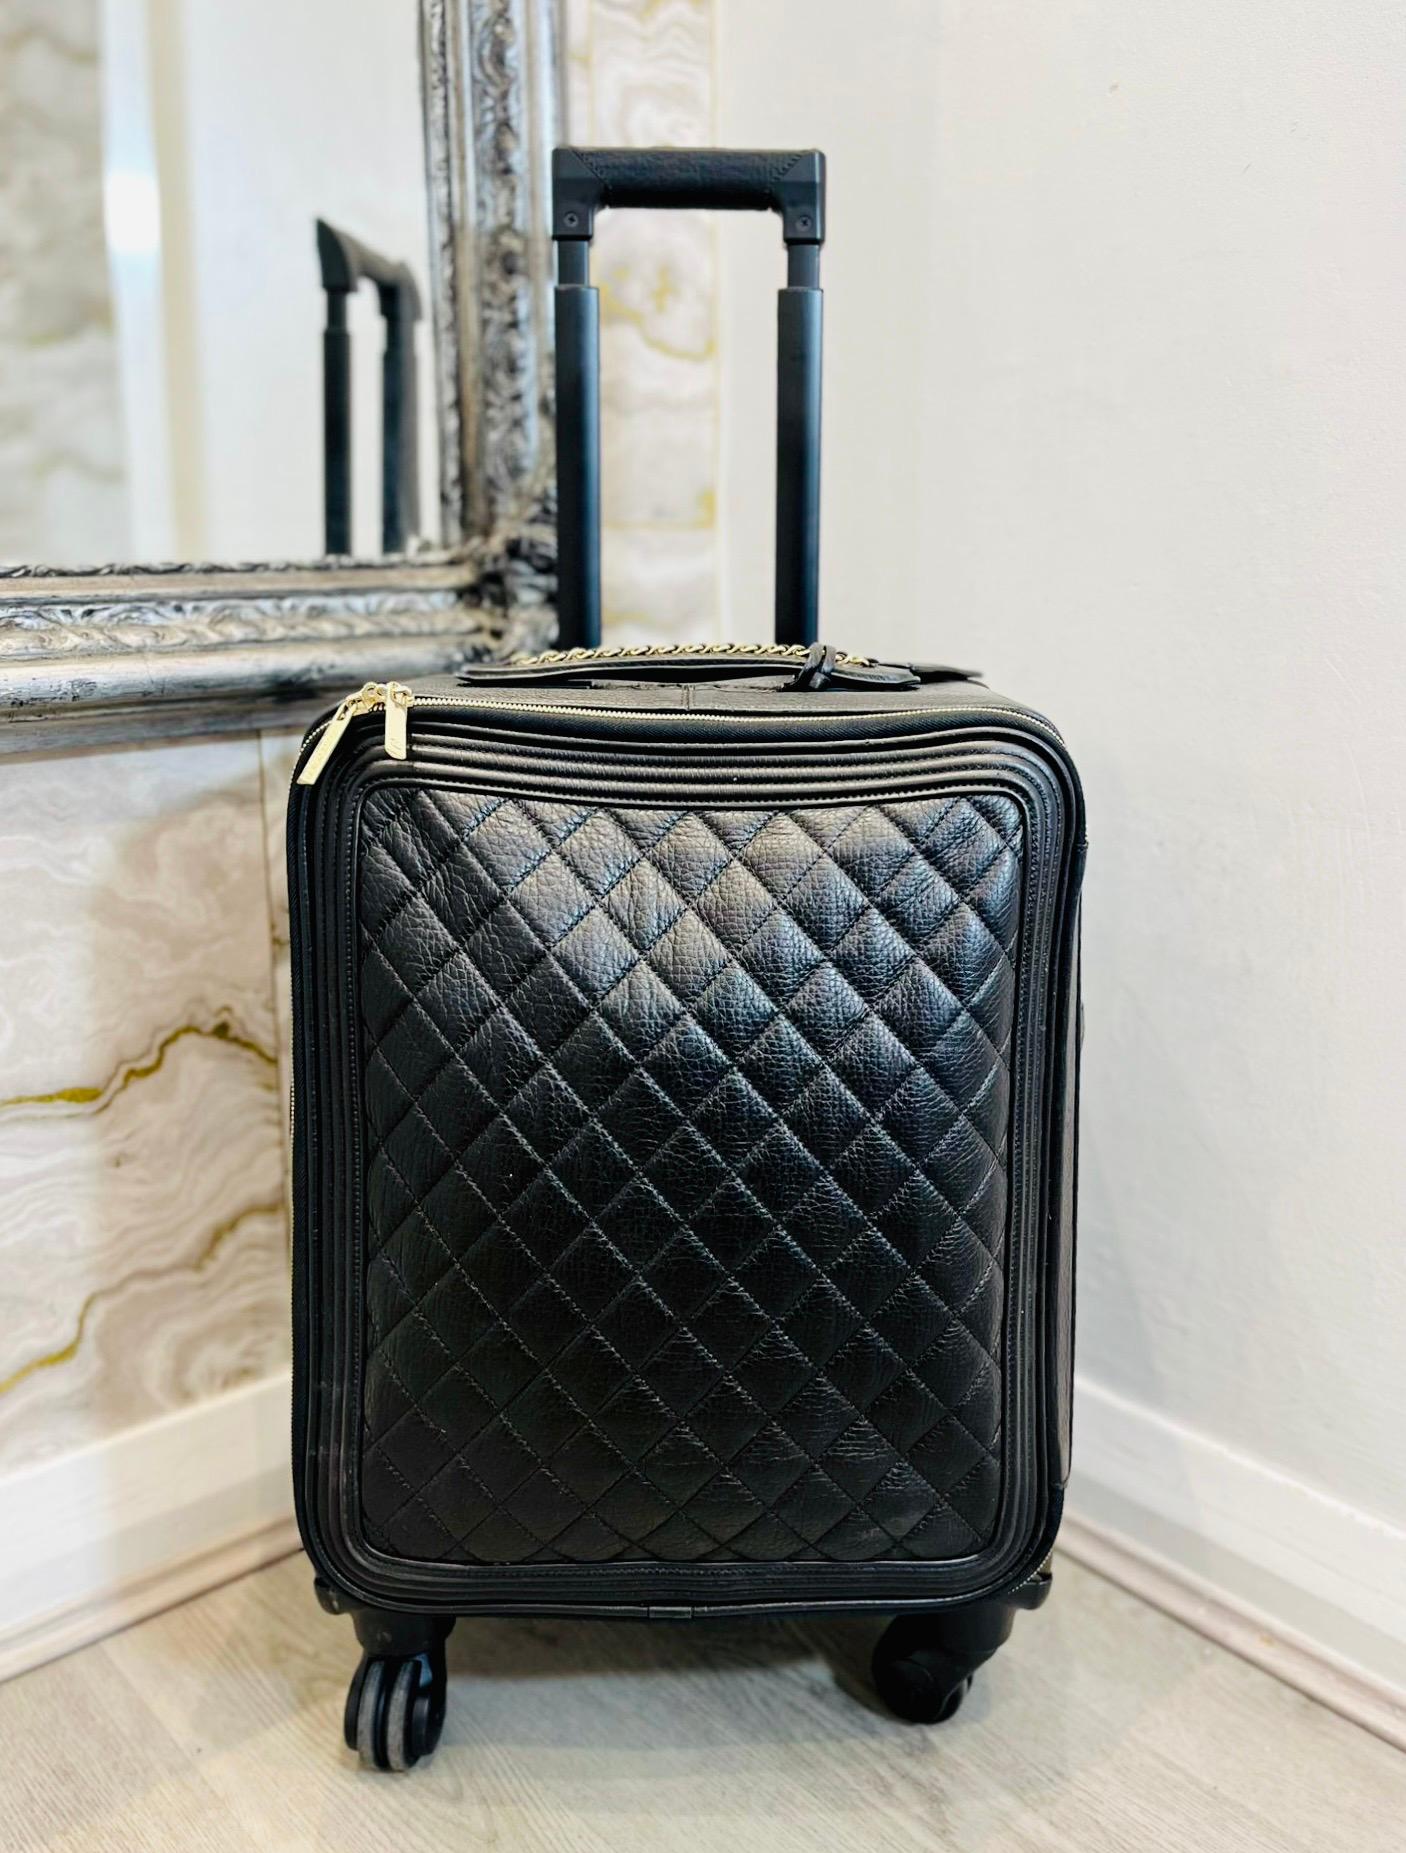 Chanel Caviar Quilted Leather Coco Suitcase

Black trolley bag designed with signature diamond stitching, four wheels and extendable handle.

Detailed with gold hardware, chain embellished top handle with leather 'CC' logo embossed tag. 

Styled